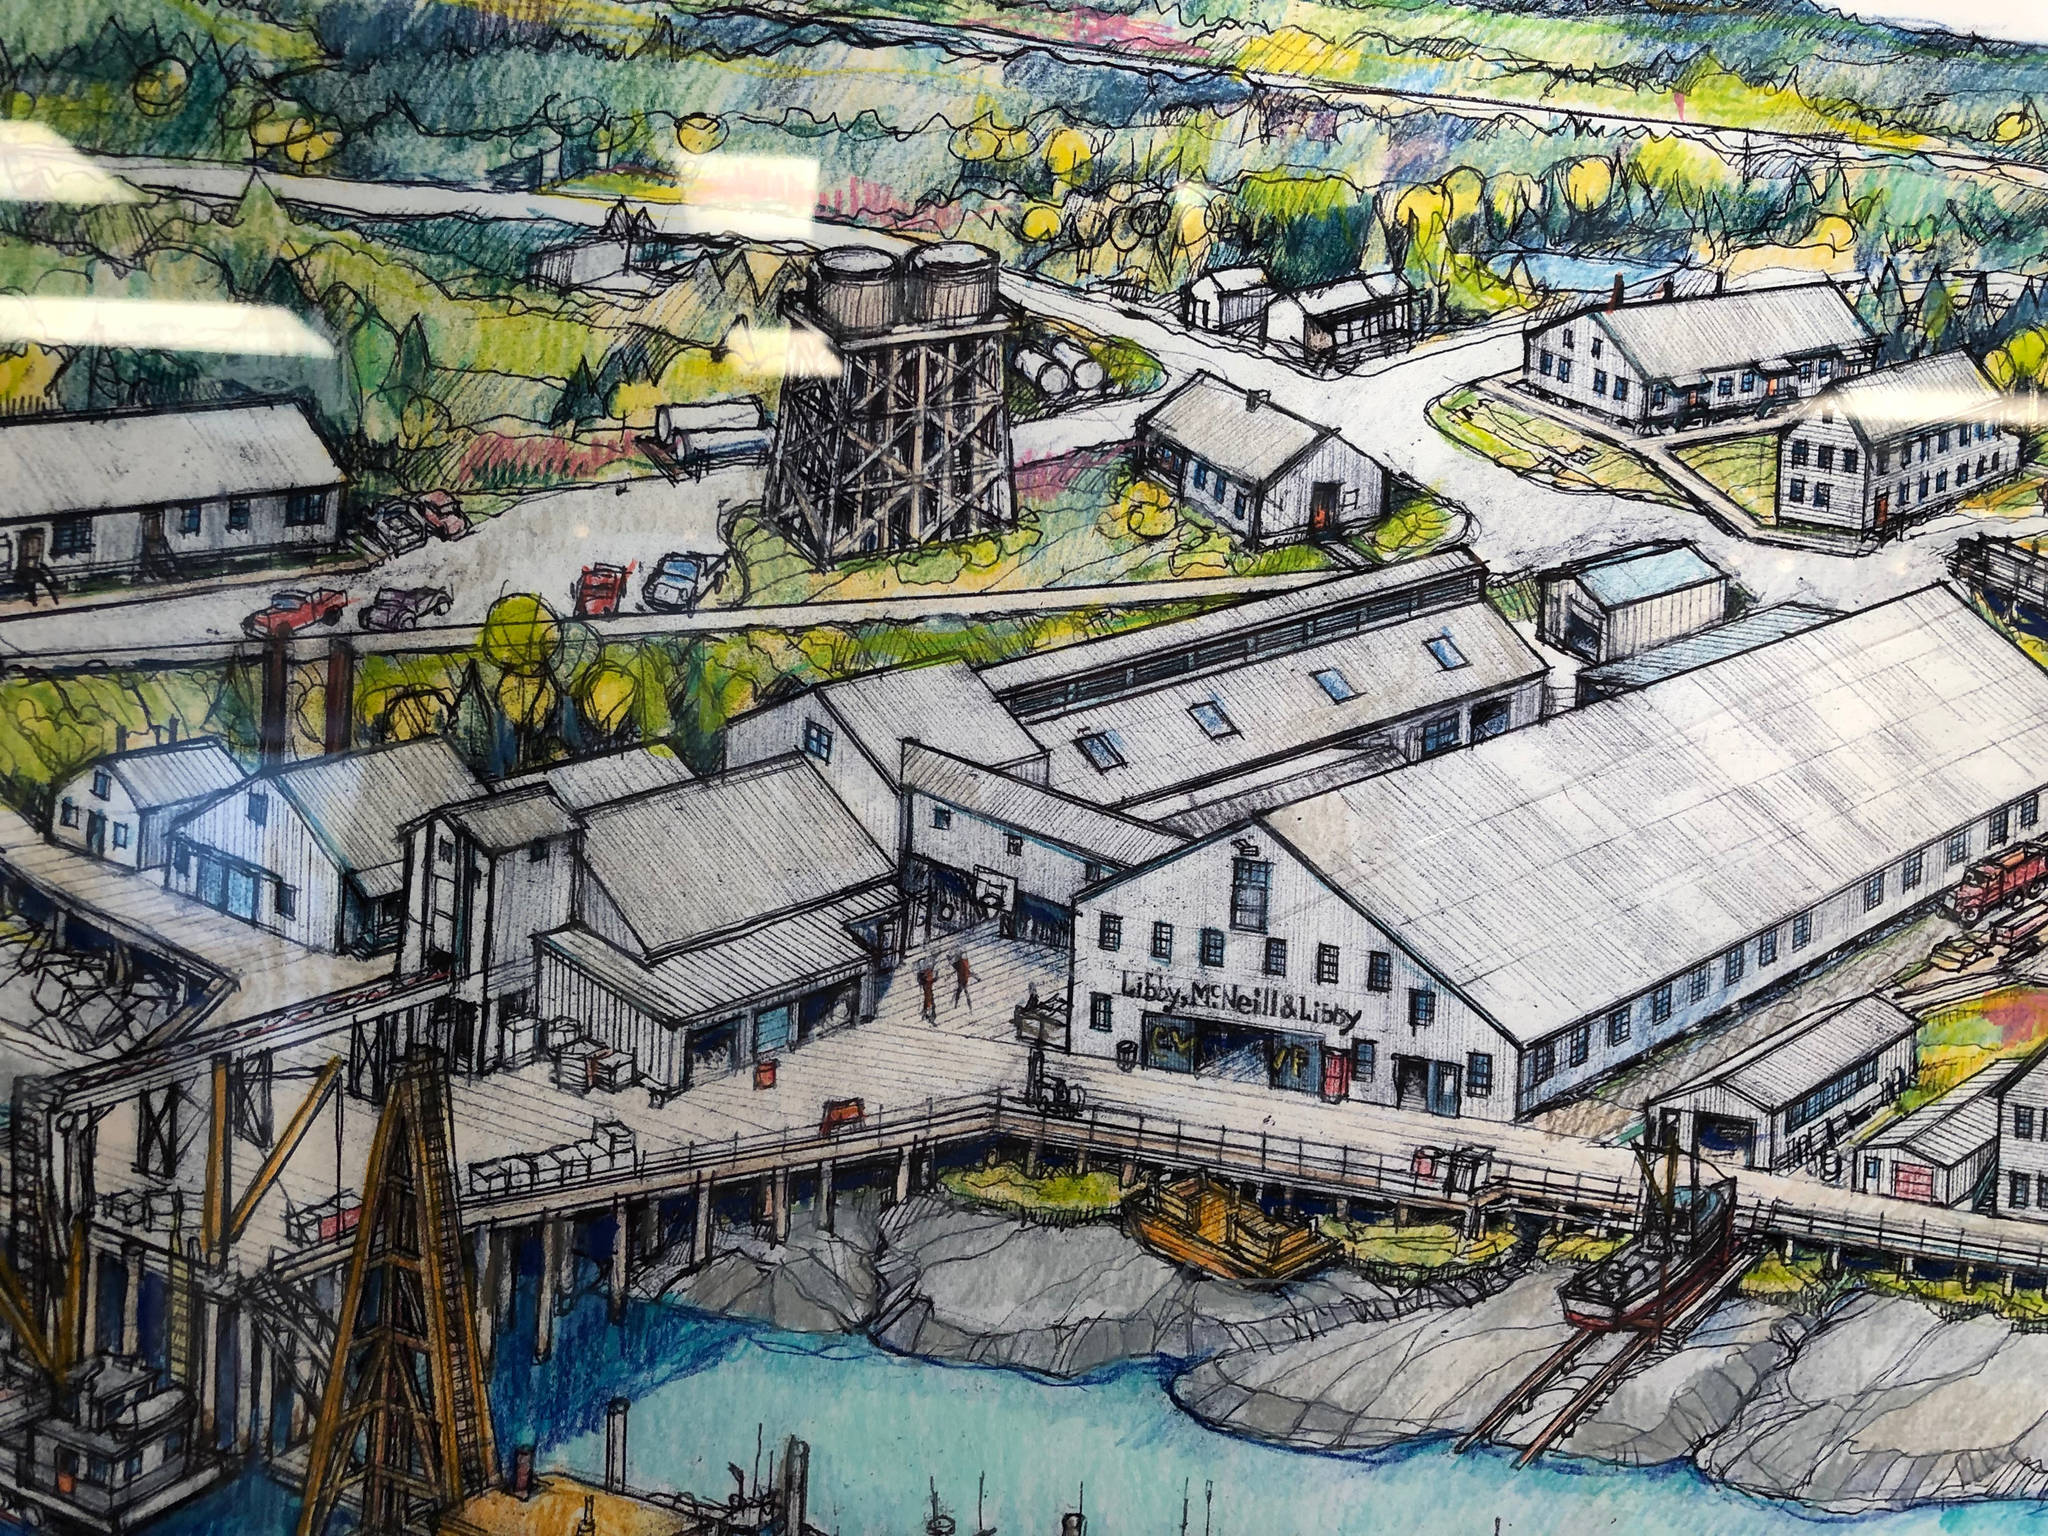 A detailed look at an illustration of old Kenai and the Columbia Ward Fisheries by Thor Evenson at the Kenai Fine Art Center Thursday, June 6, 2019, during the opening reception to the June exhibit Historic Buildings of Kenai. (Photo by Joey Klecka/Peninsula Clarion)